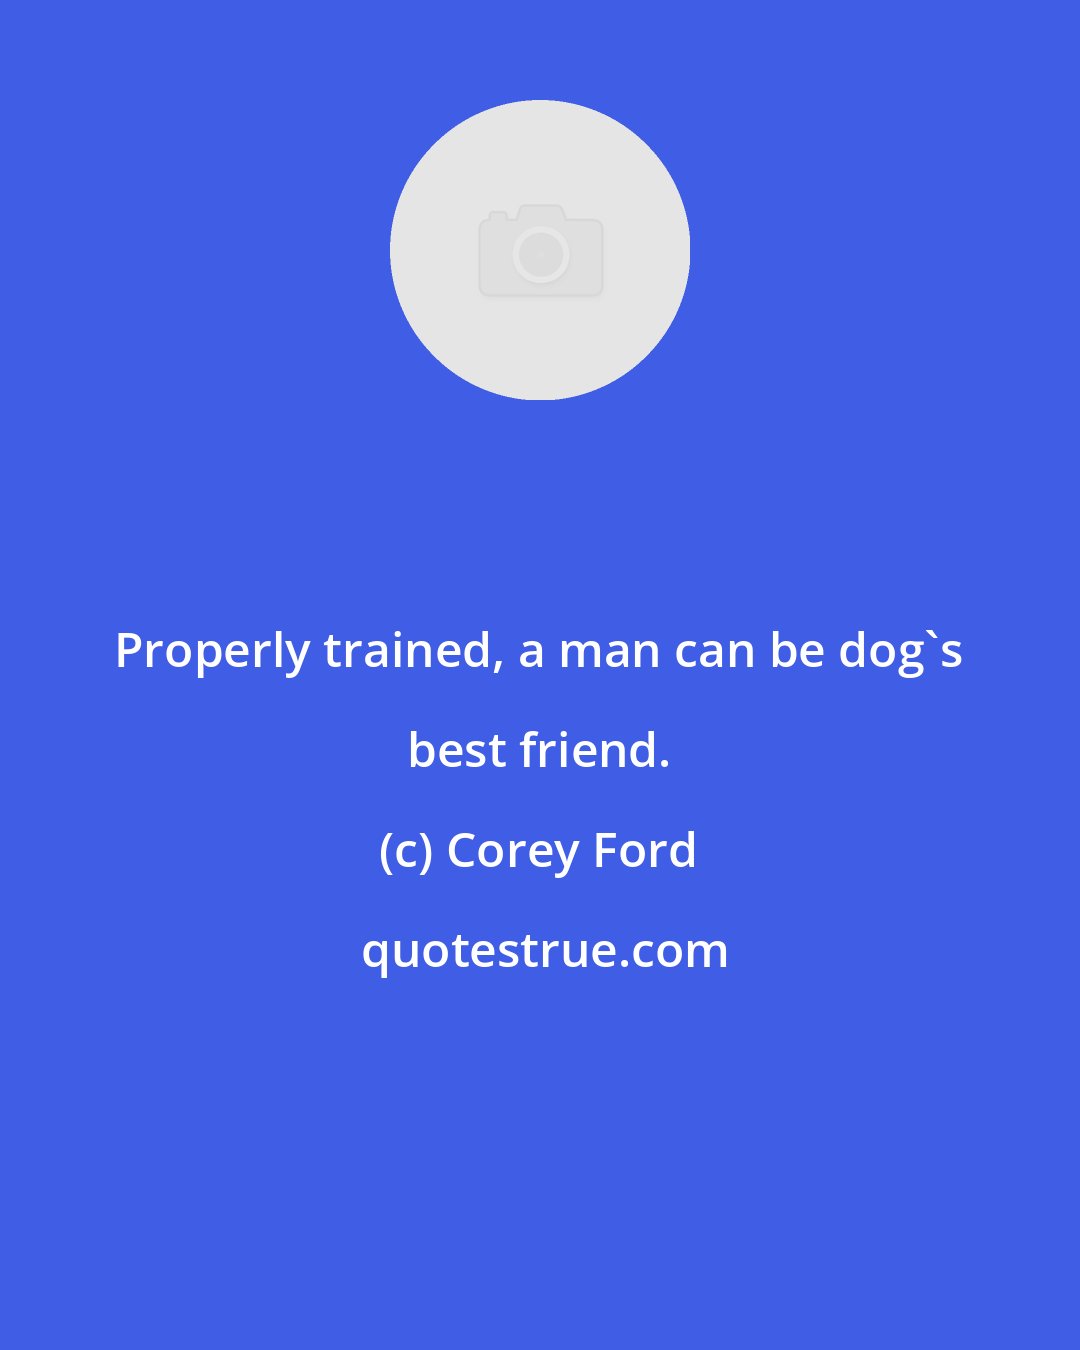 Corey Ford: Properly trained, a man can be dog's best friend.